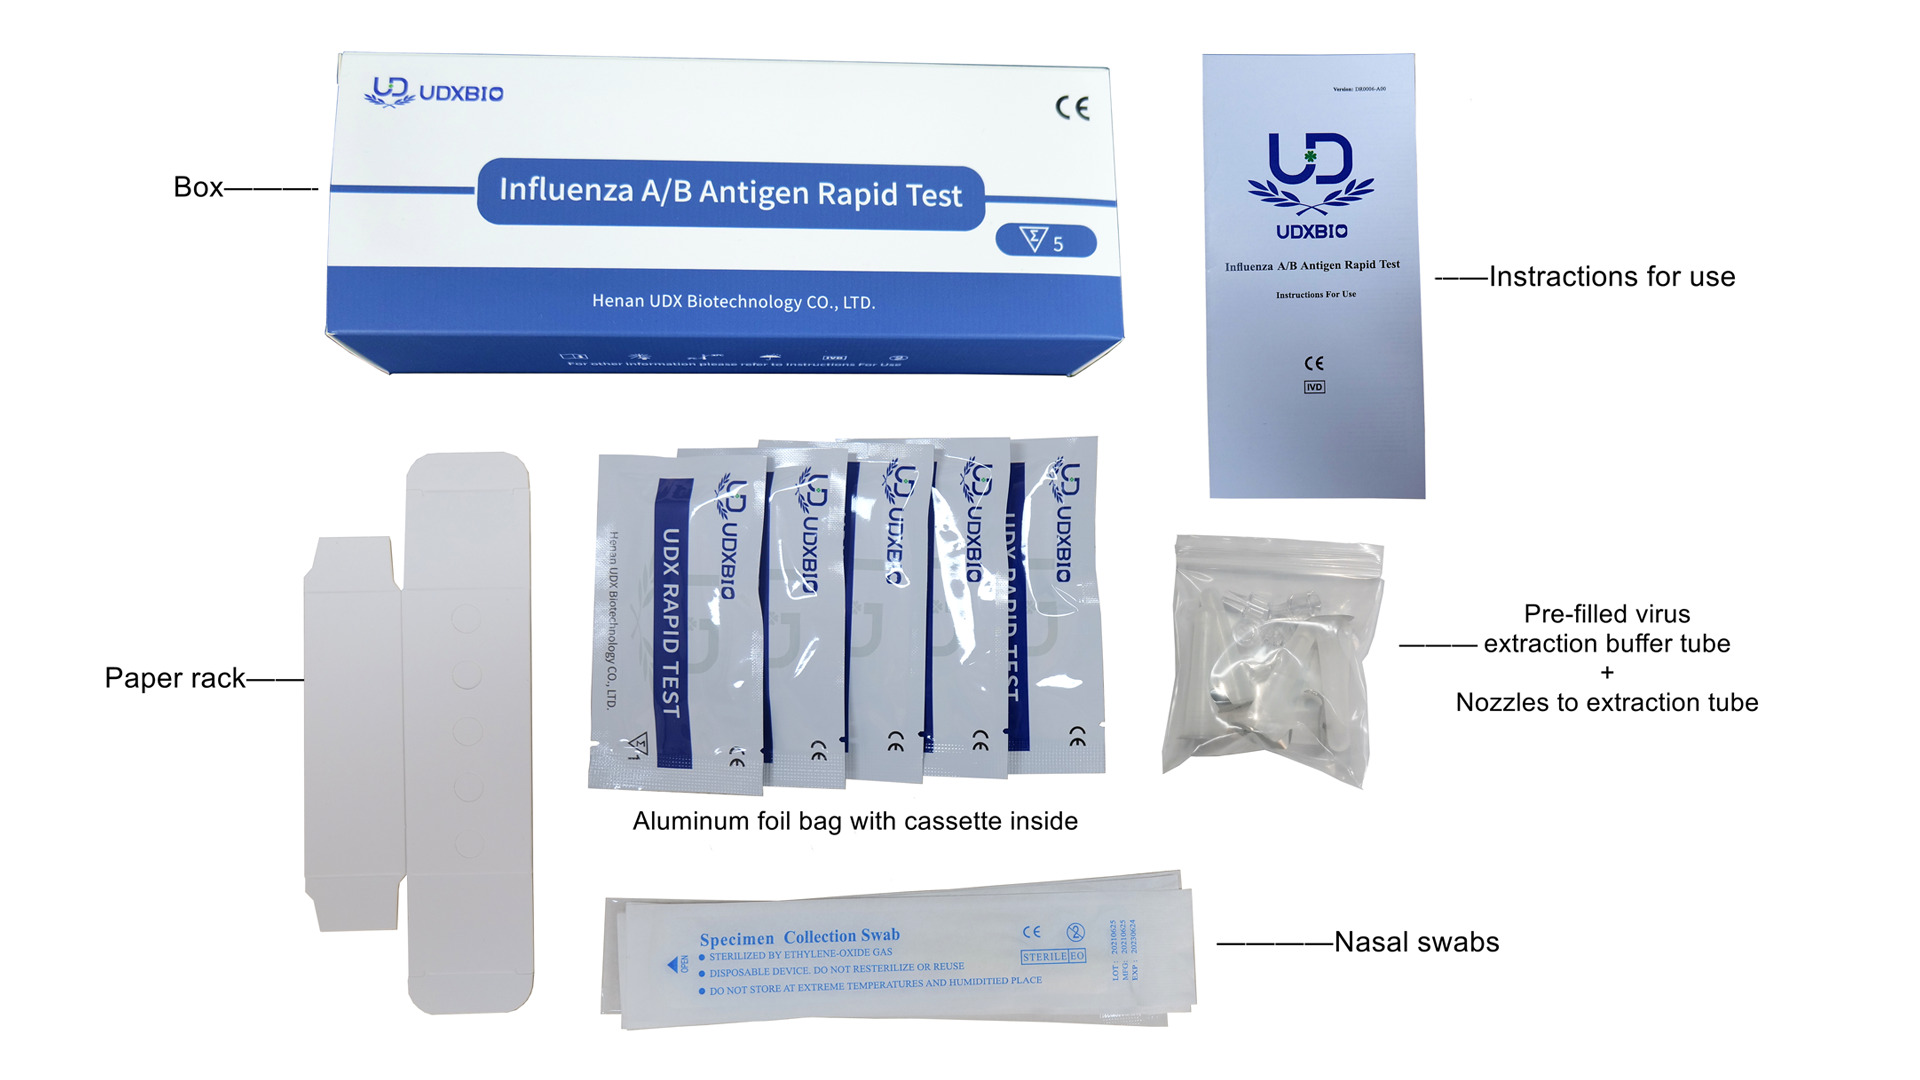 Exploring The Accuracy And Applications of Influenza A/B Antigen Rapid Tests